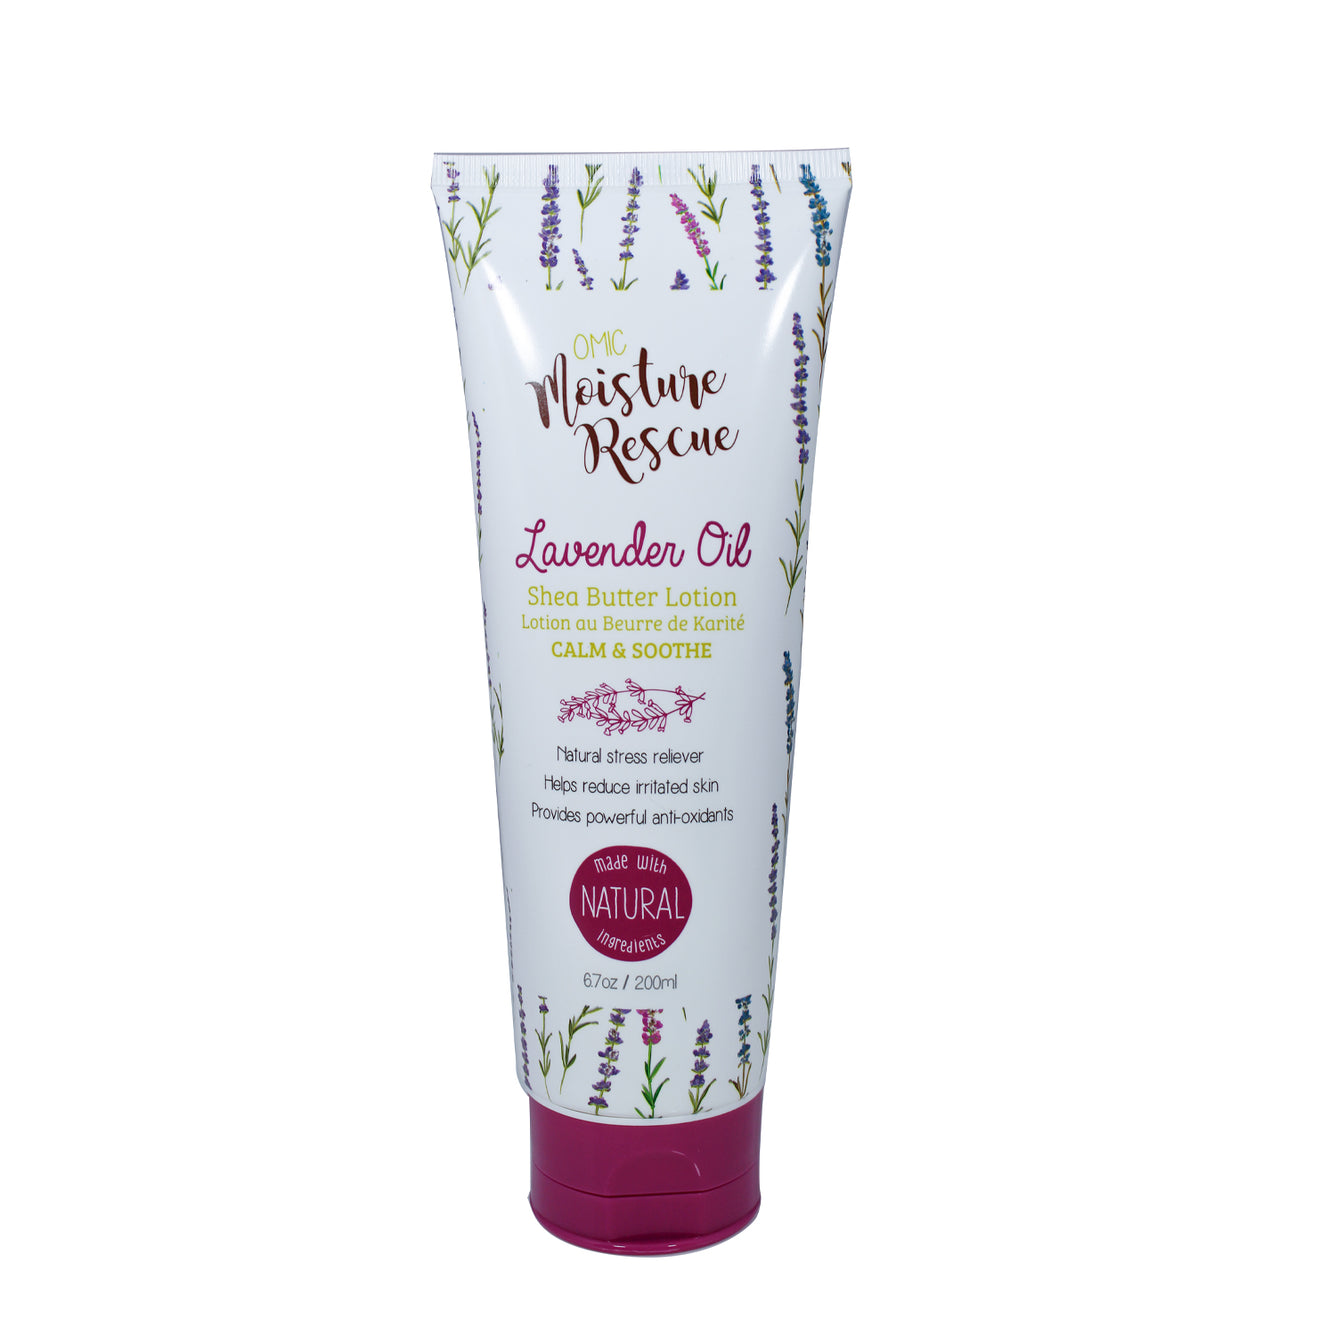 Moisture Rescue Shea Butter Lotion Tube  with Lavender Oil Mitchell Brands - Mitchell Brands - Skin Lightening, Skin Brightening, Fade Dark Spots, Shea Butter, Hair Growth Products